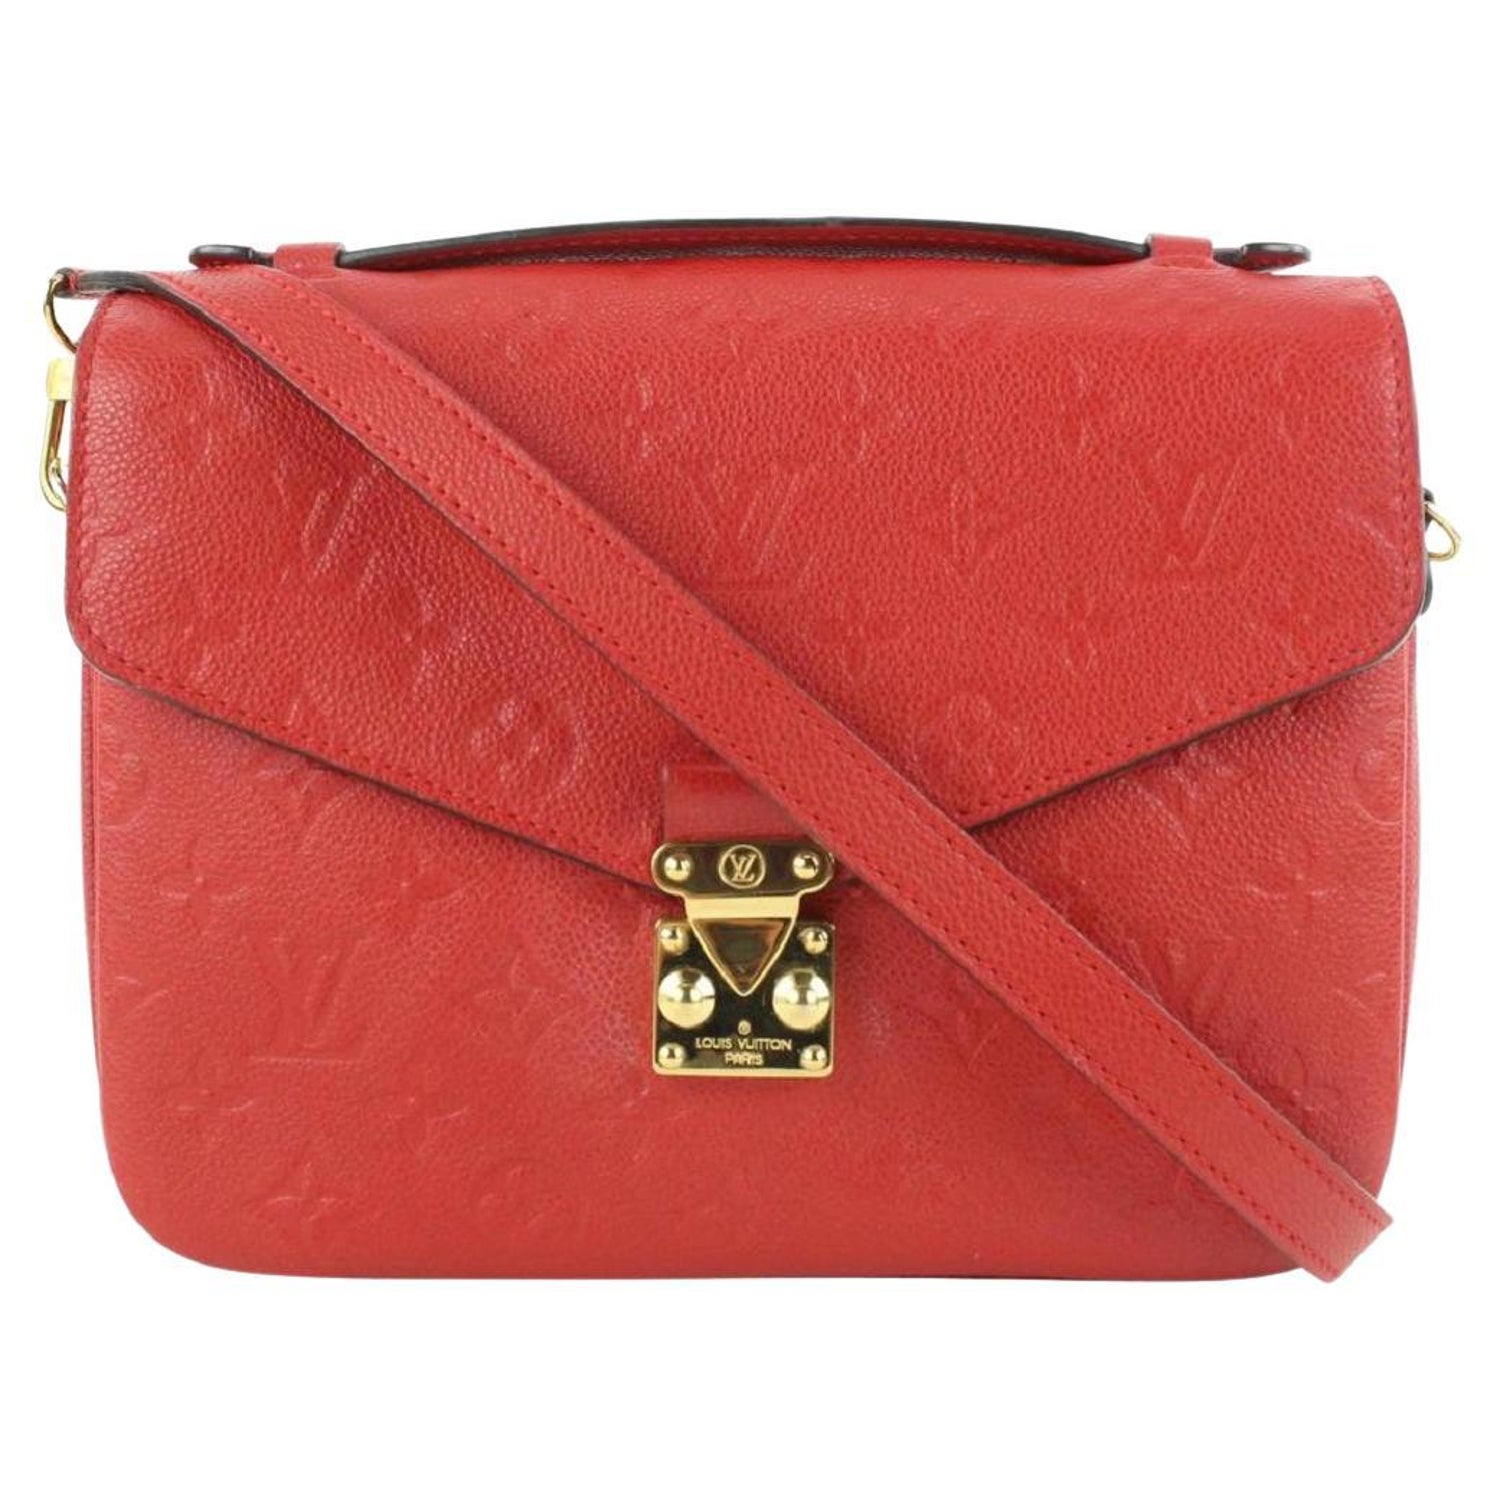 Louis Vuitton Metis Style - For Sale on 1stDibs